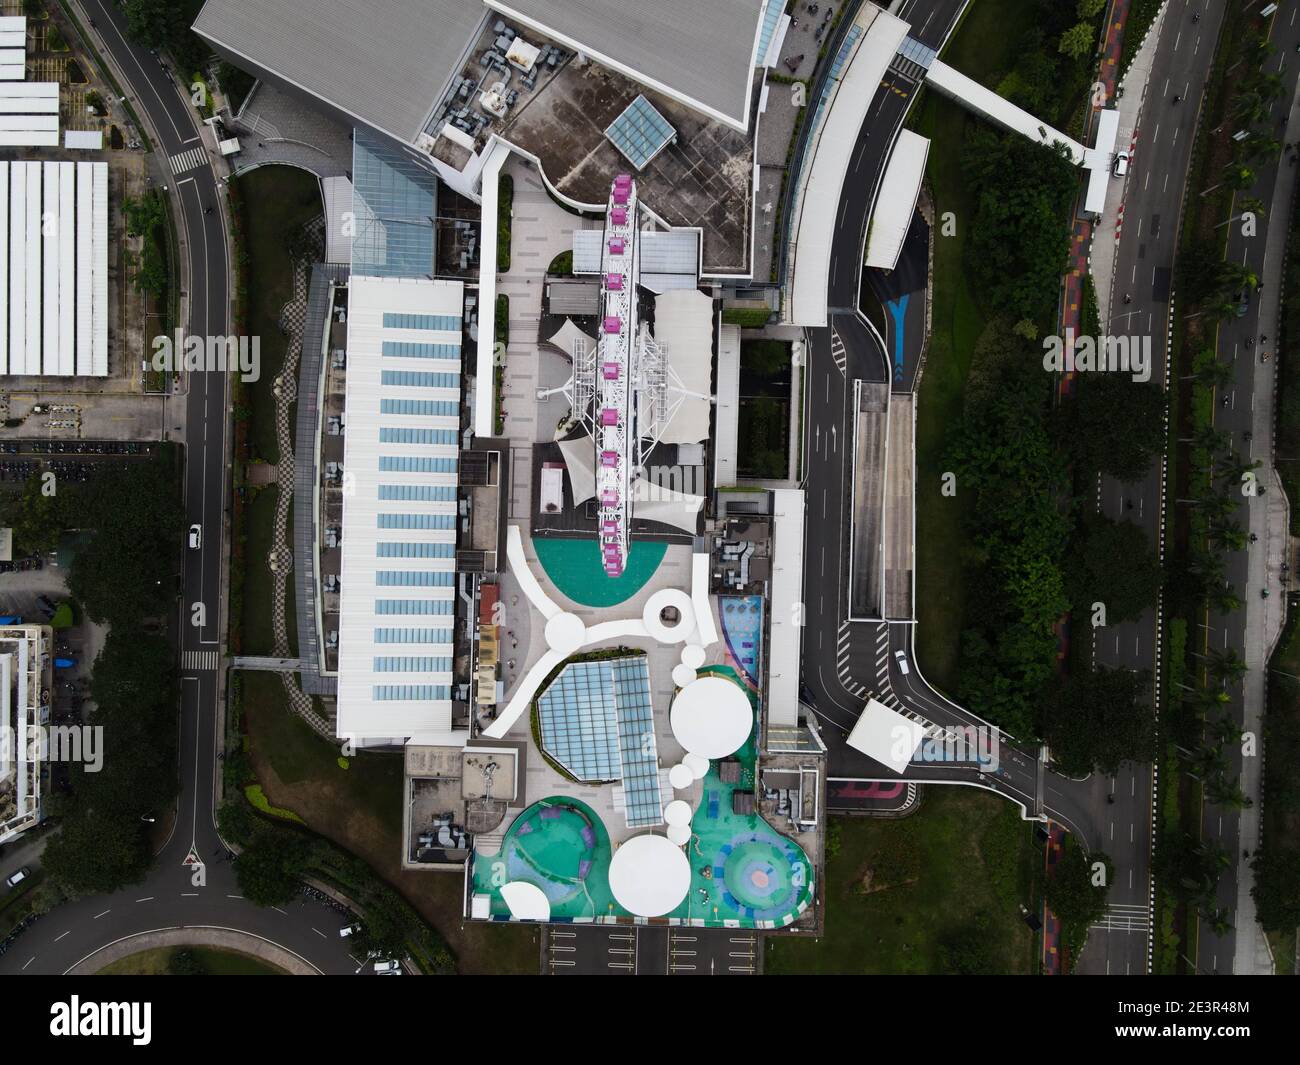 Aerial view of AEON MALL Jakarta Garden City, AEON is a Largest